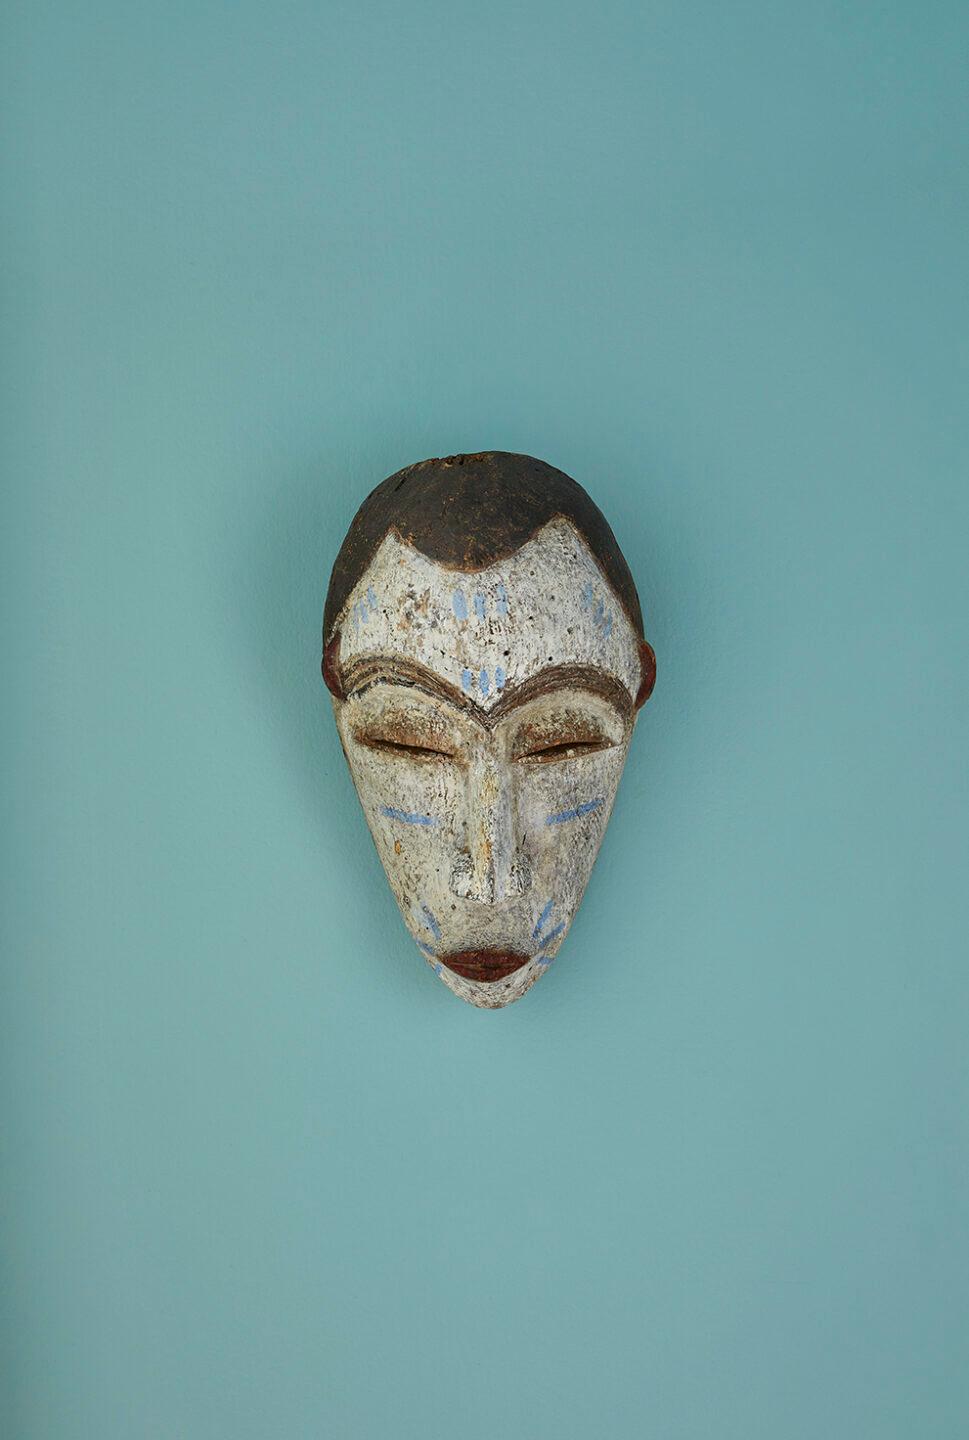 Africa, 1940s

Baoule mask. 

A legend says that this type of African mask is a Baoule mask which is also known as a Goli mask. It is used in tribal dances during harvest festivals, in processions to honour distinguished visitors and at the